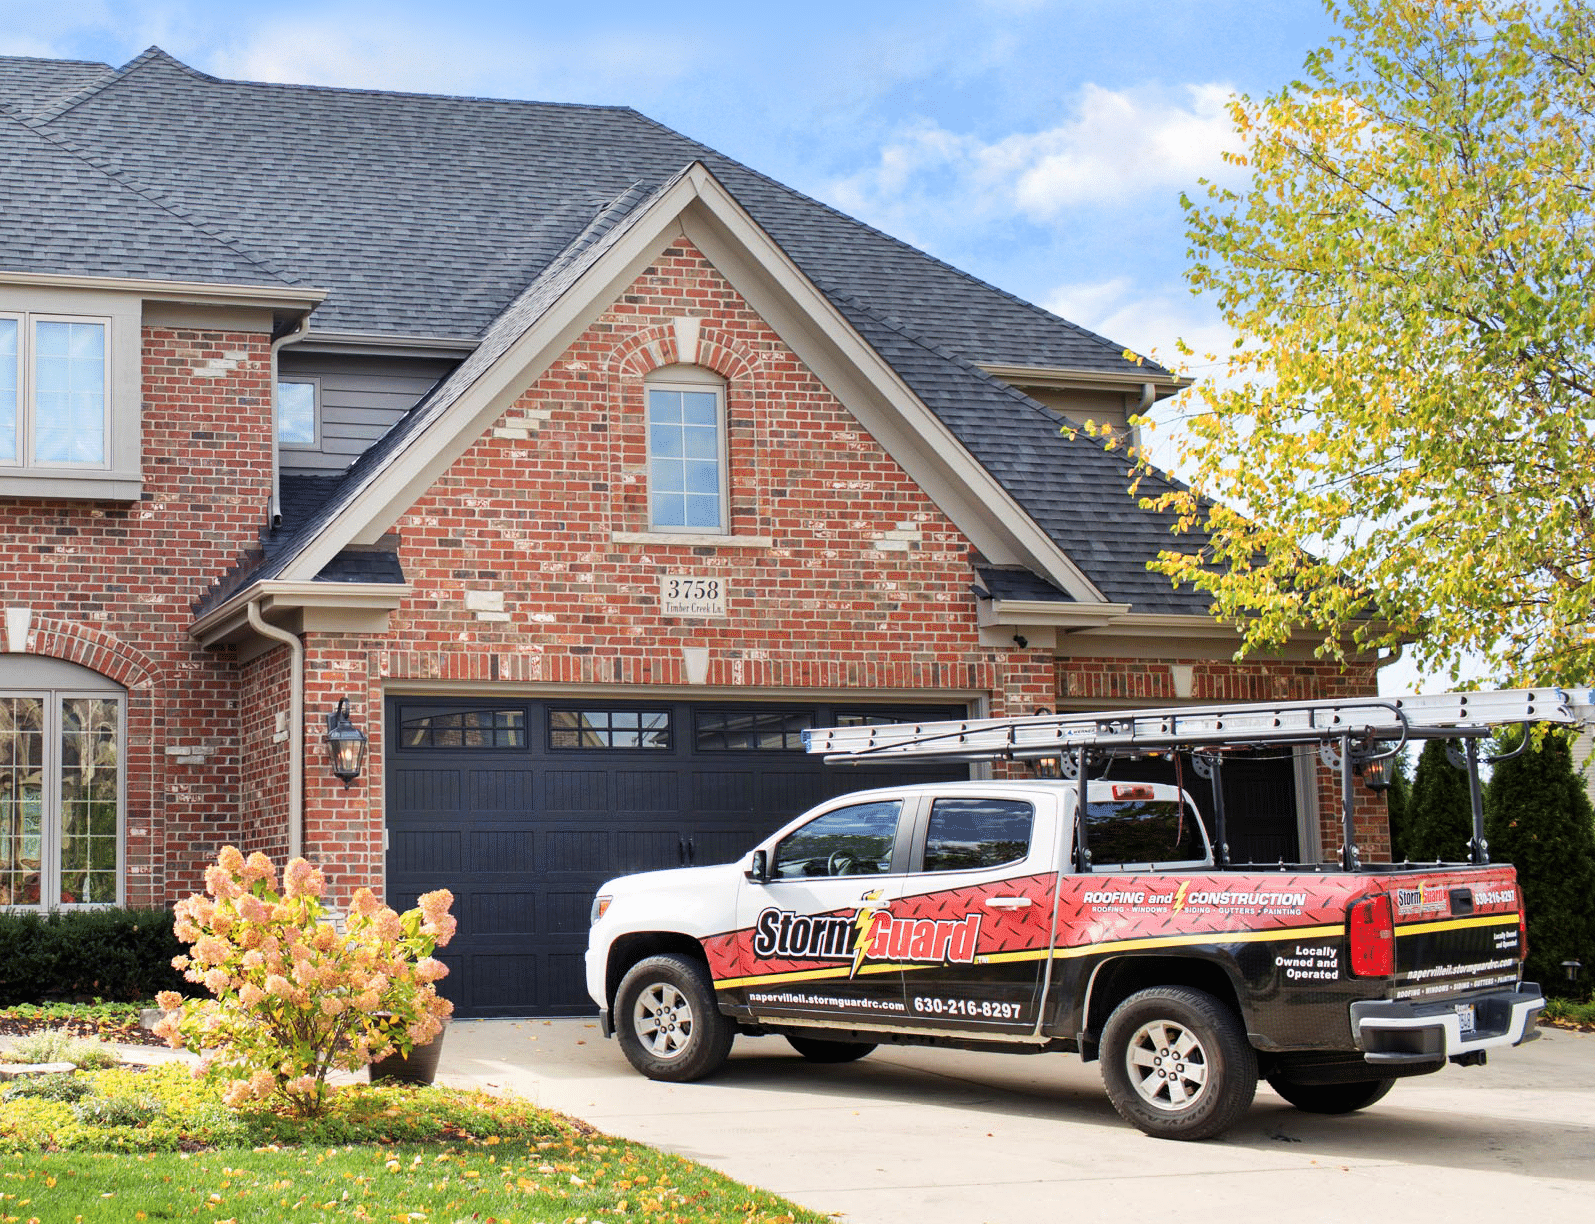 Brick House with Storm Guard Restoration Services Truck In Driveway - Evansville